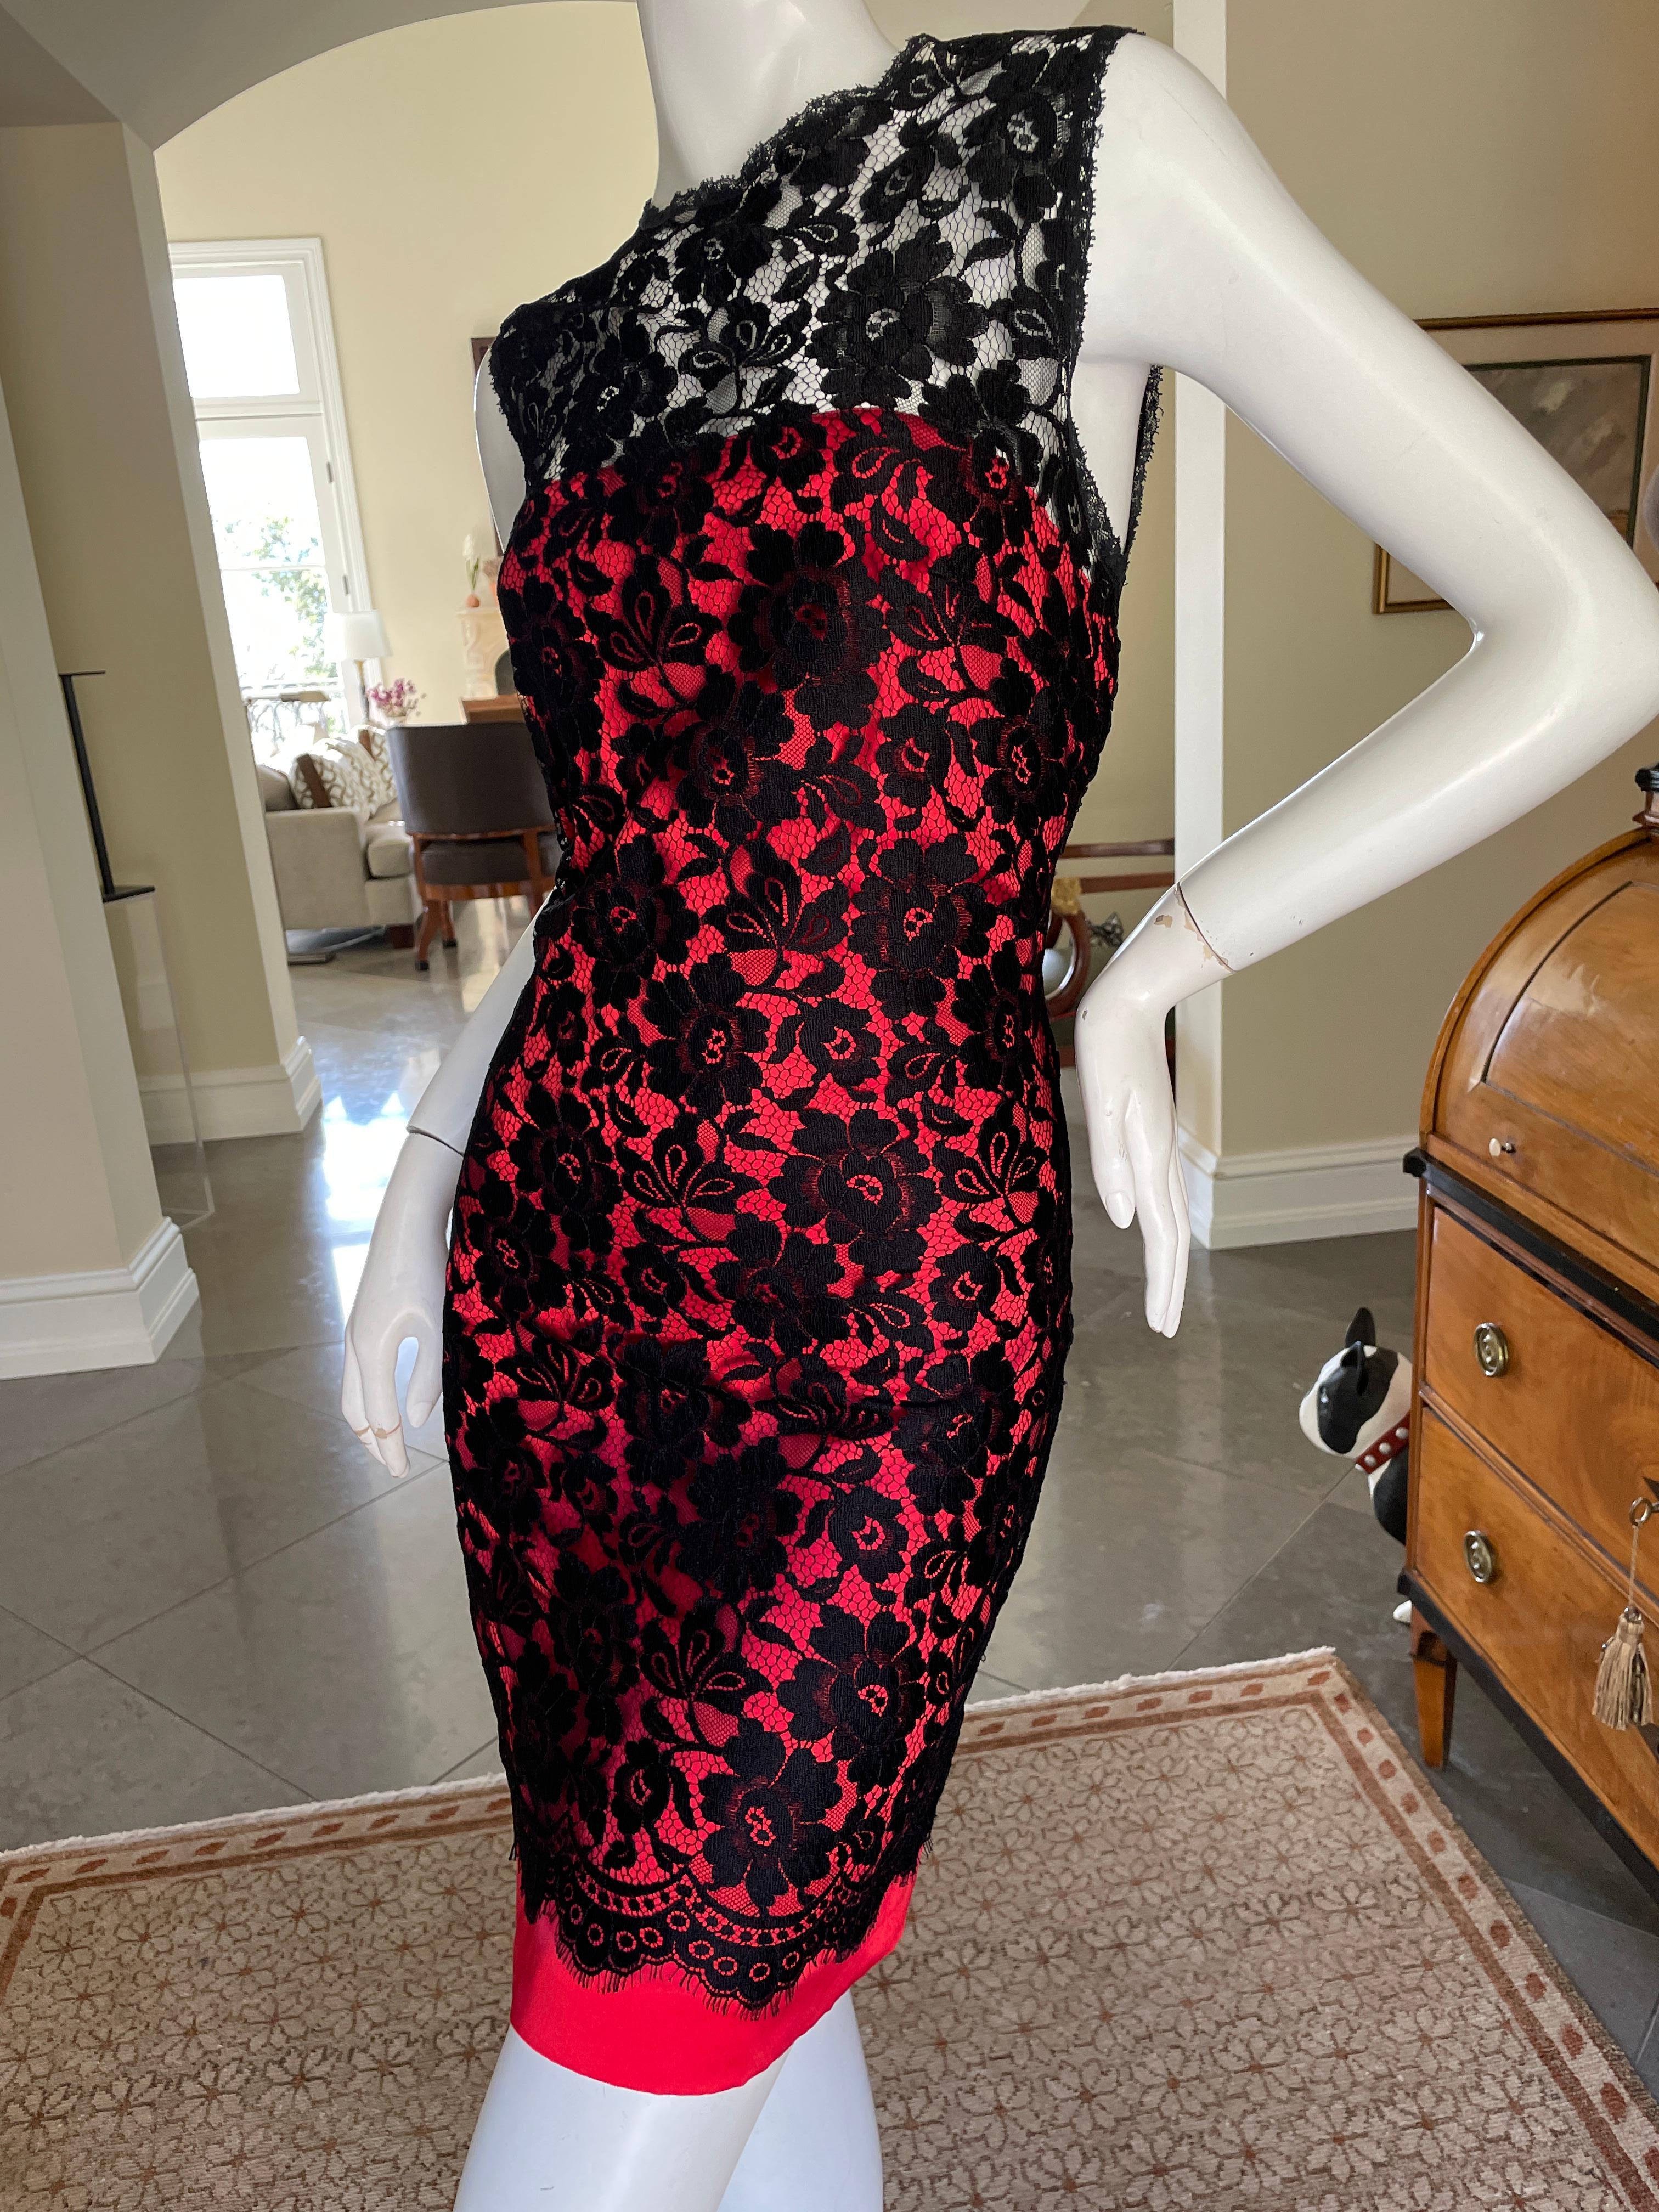 red dress with black lace overlay